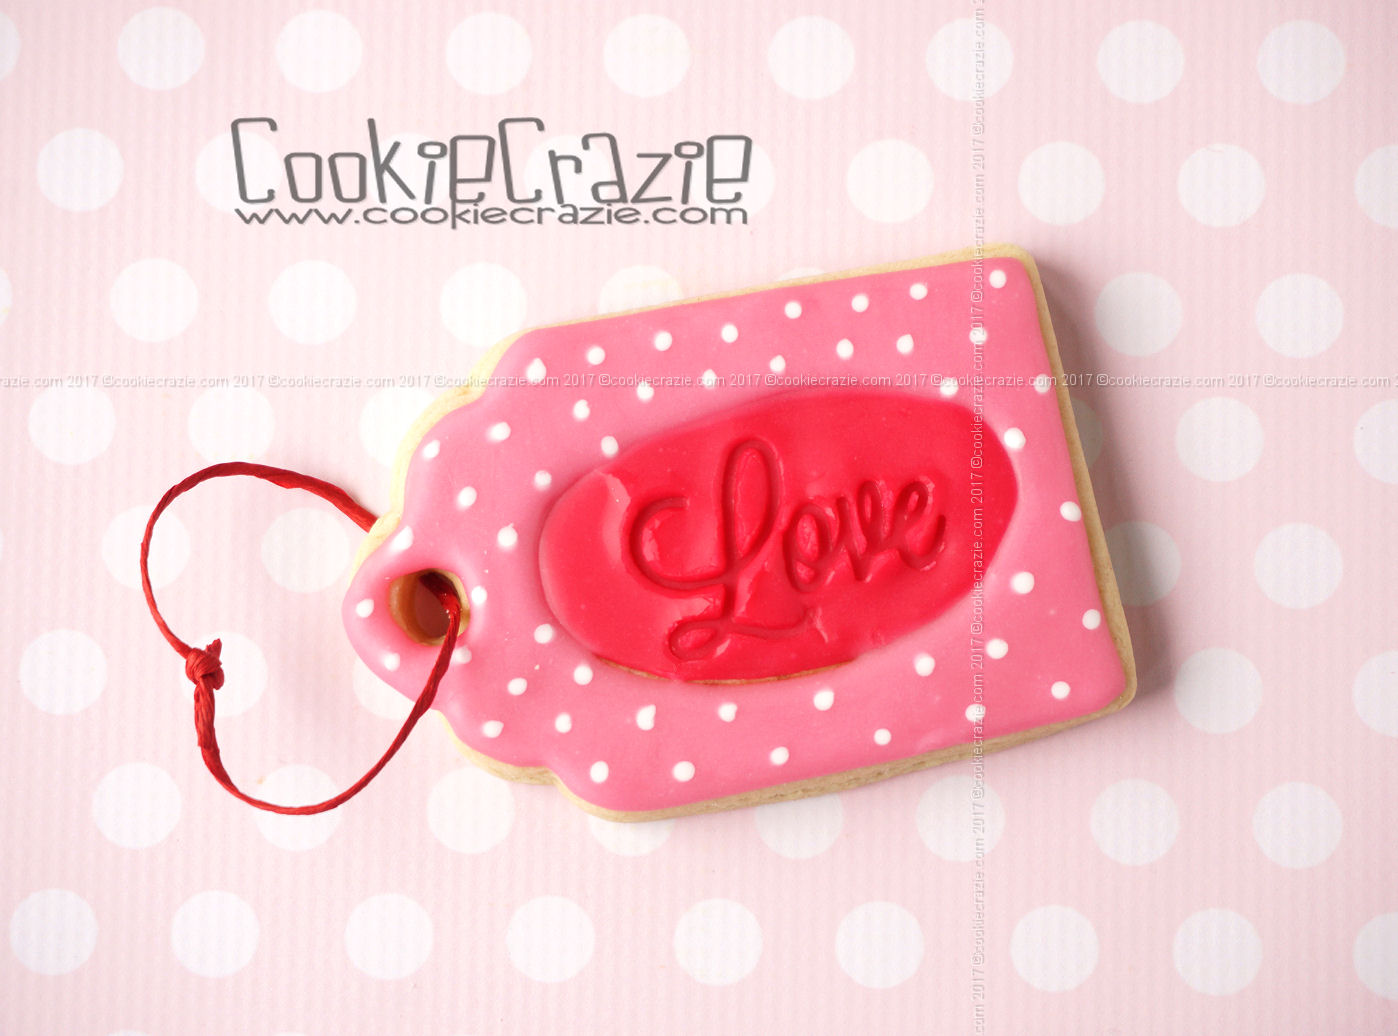  Oval Love Valentines Gift Tag Decorated Cookie YouTube video  HERE  